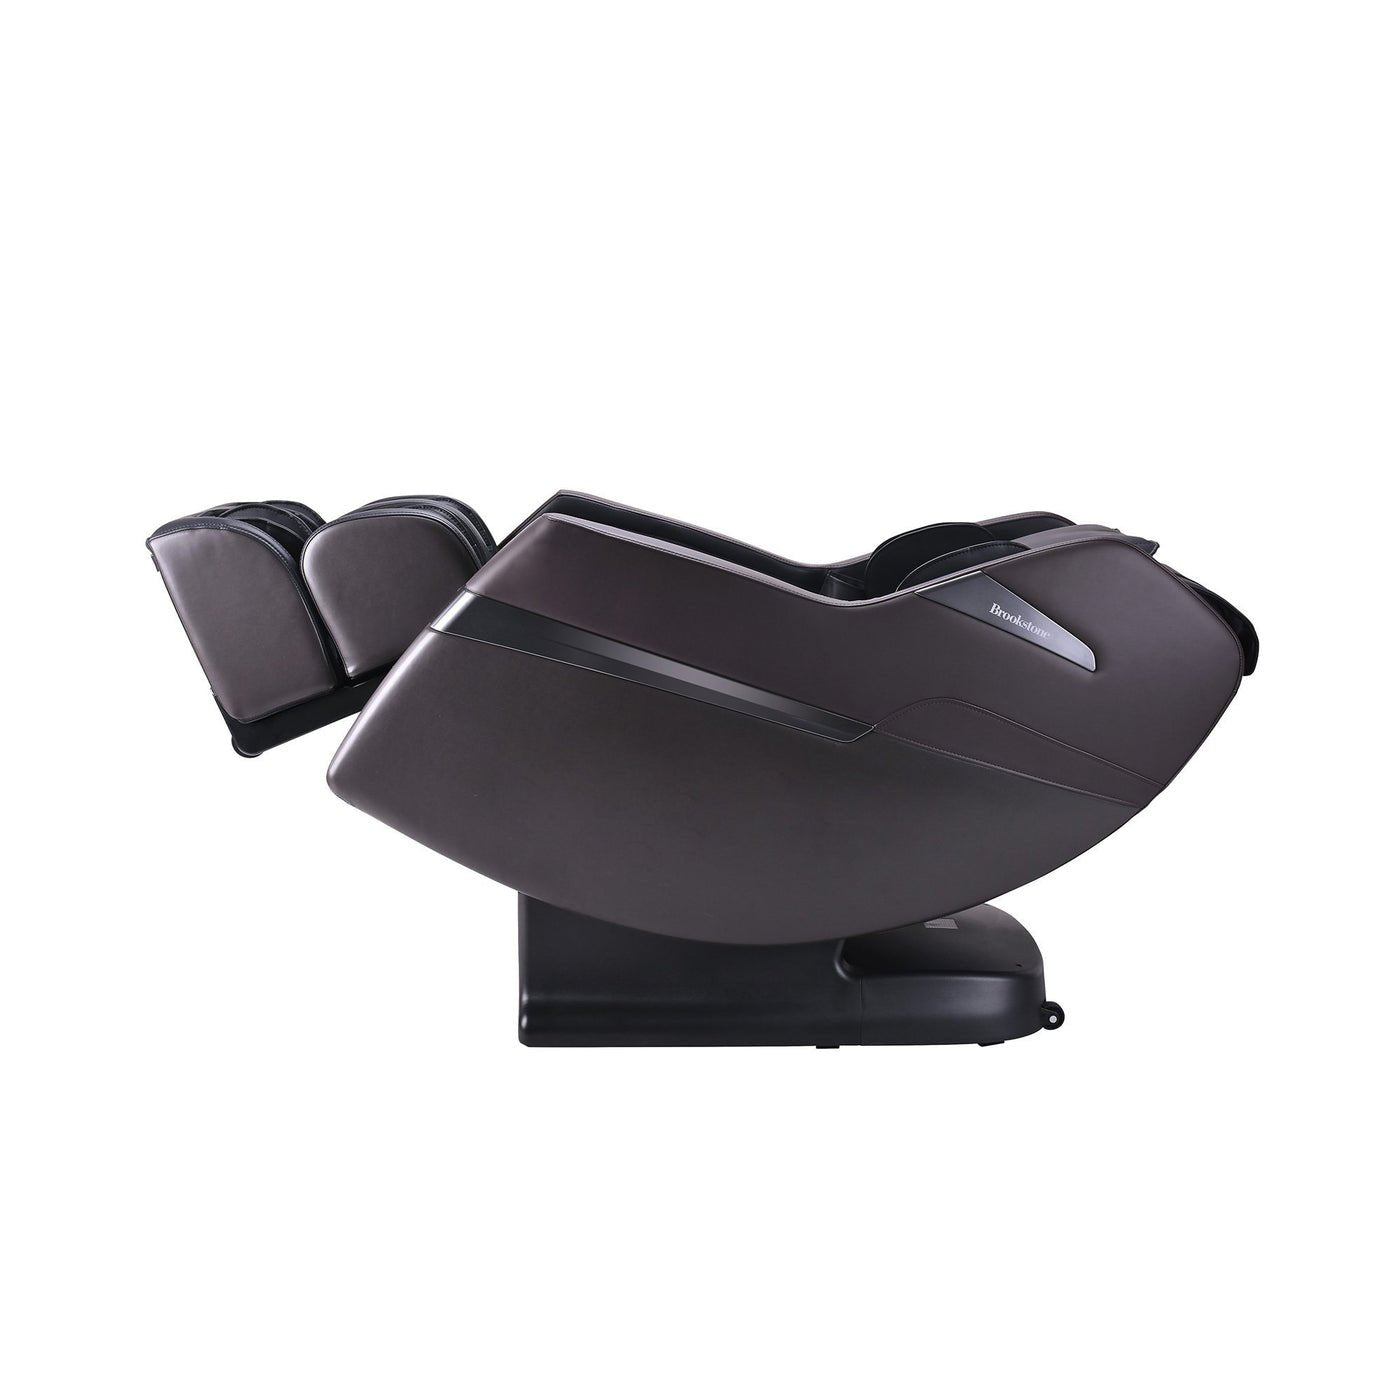 Reviewing the Latest Home Massage Chairs From Bodyfriend and